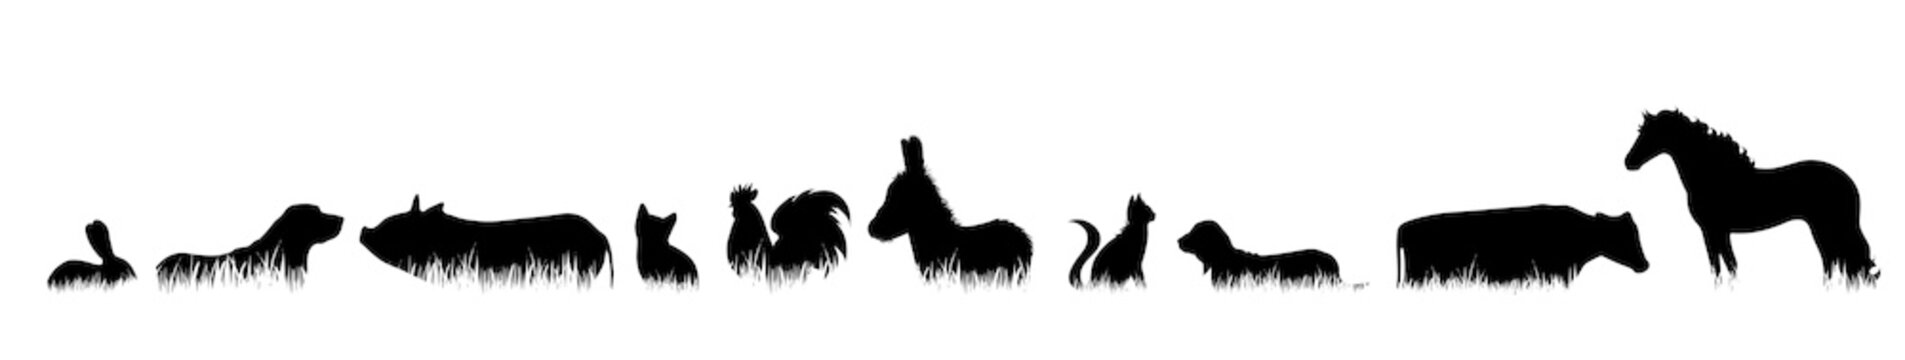 Vector silhouette of farm animal in the grass on white background.